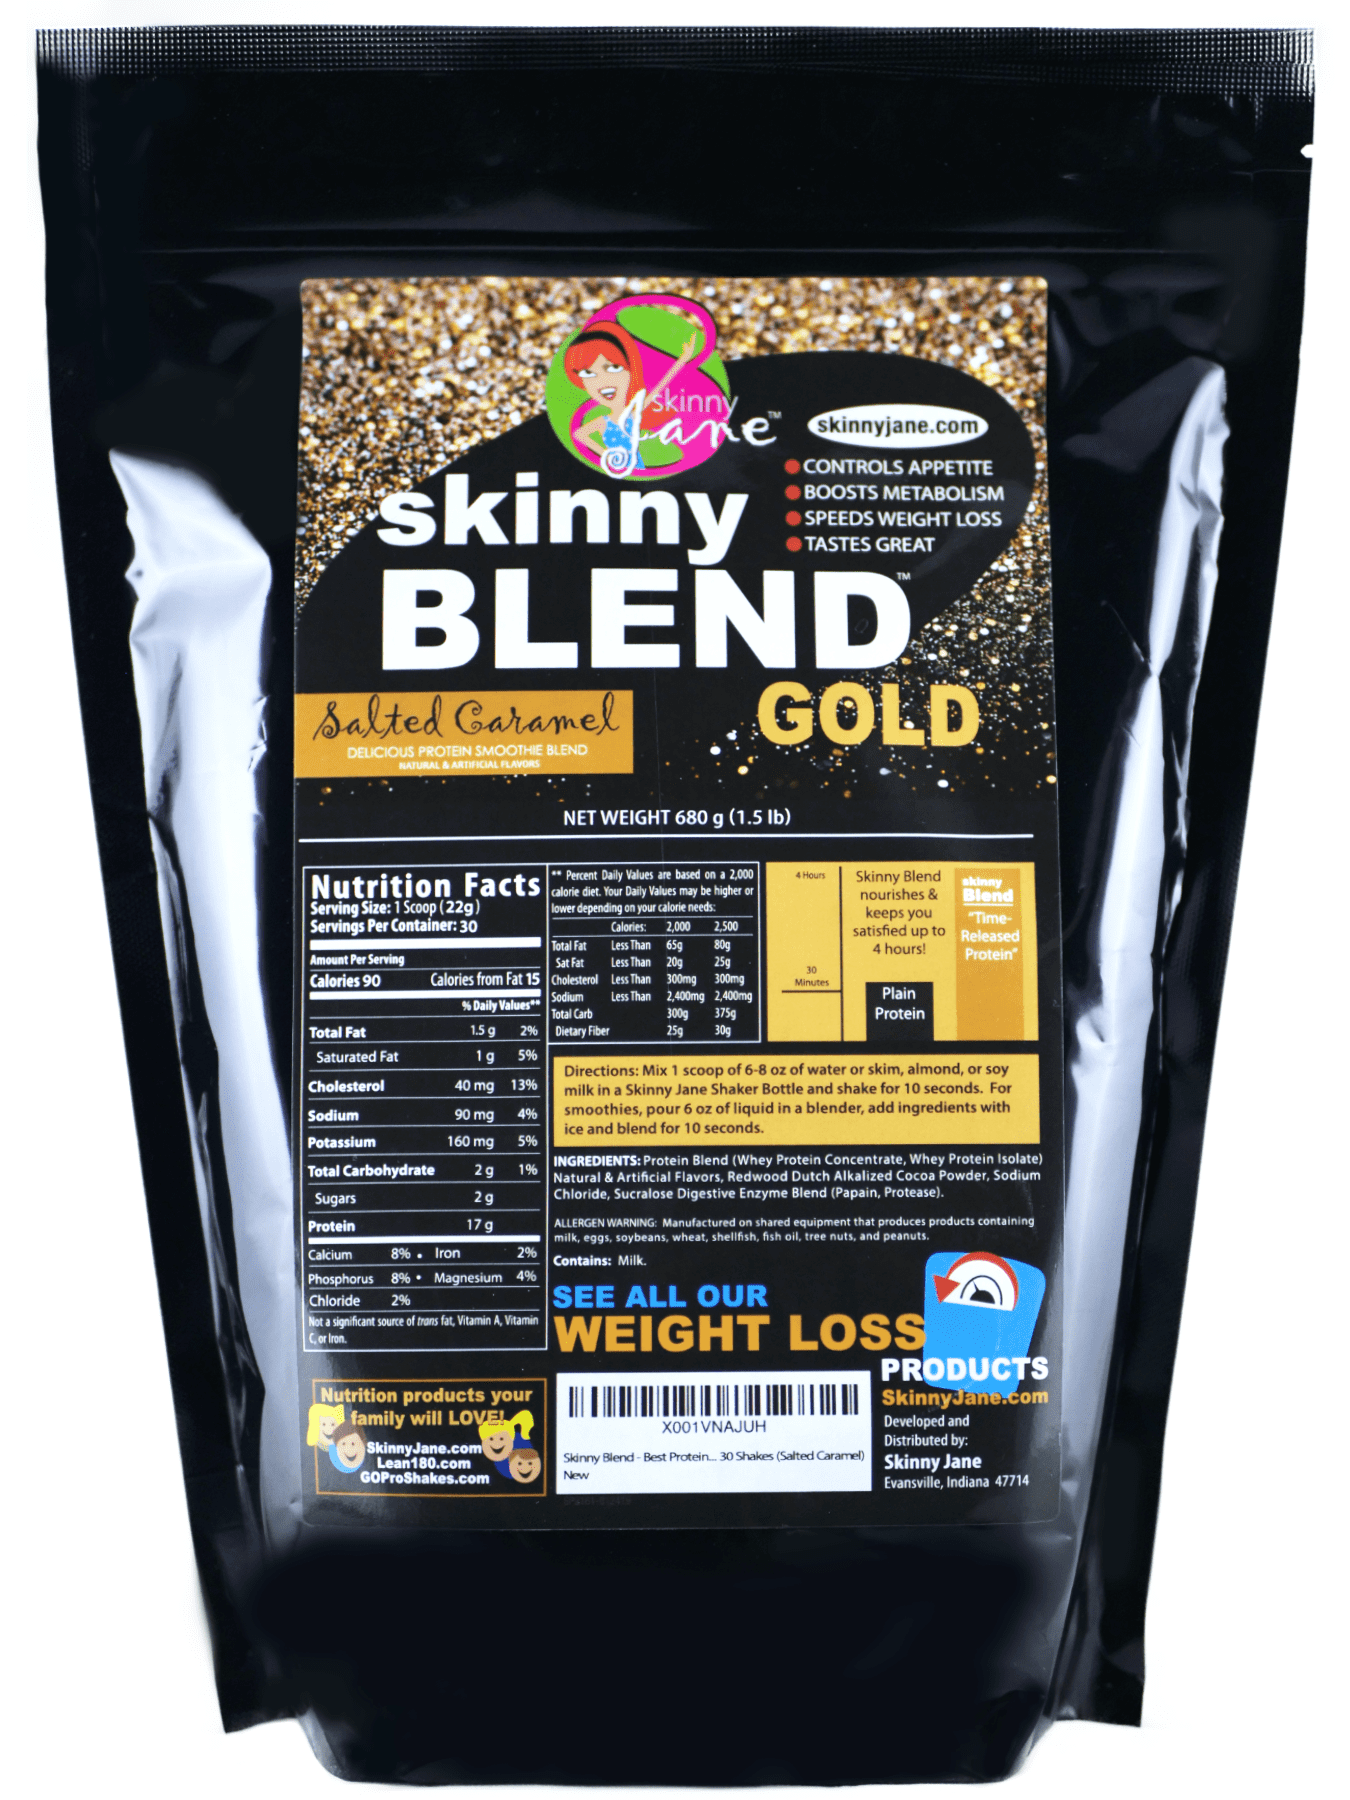 Skinny Blend Gold! - Best Tasting Protein Weight Loss Shake, Delicious Smoothie - Low Carb, Low Sugar Diet Supplement - Weight Control - (30 Servings, Salted Caramel)